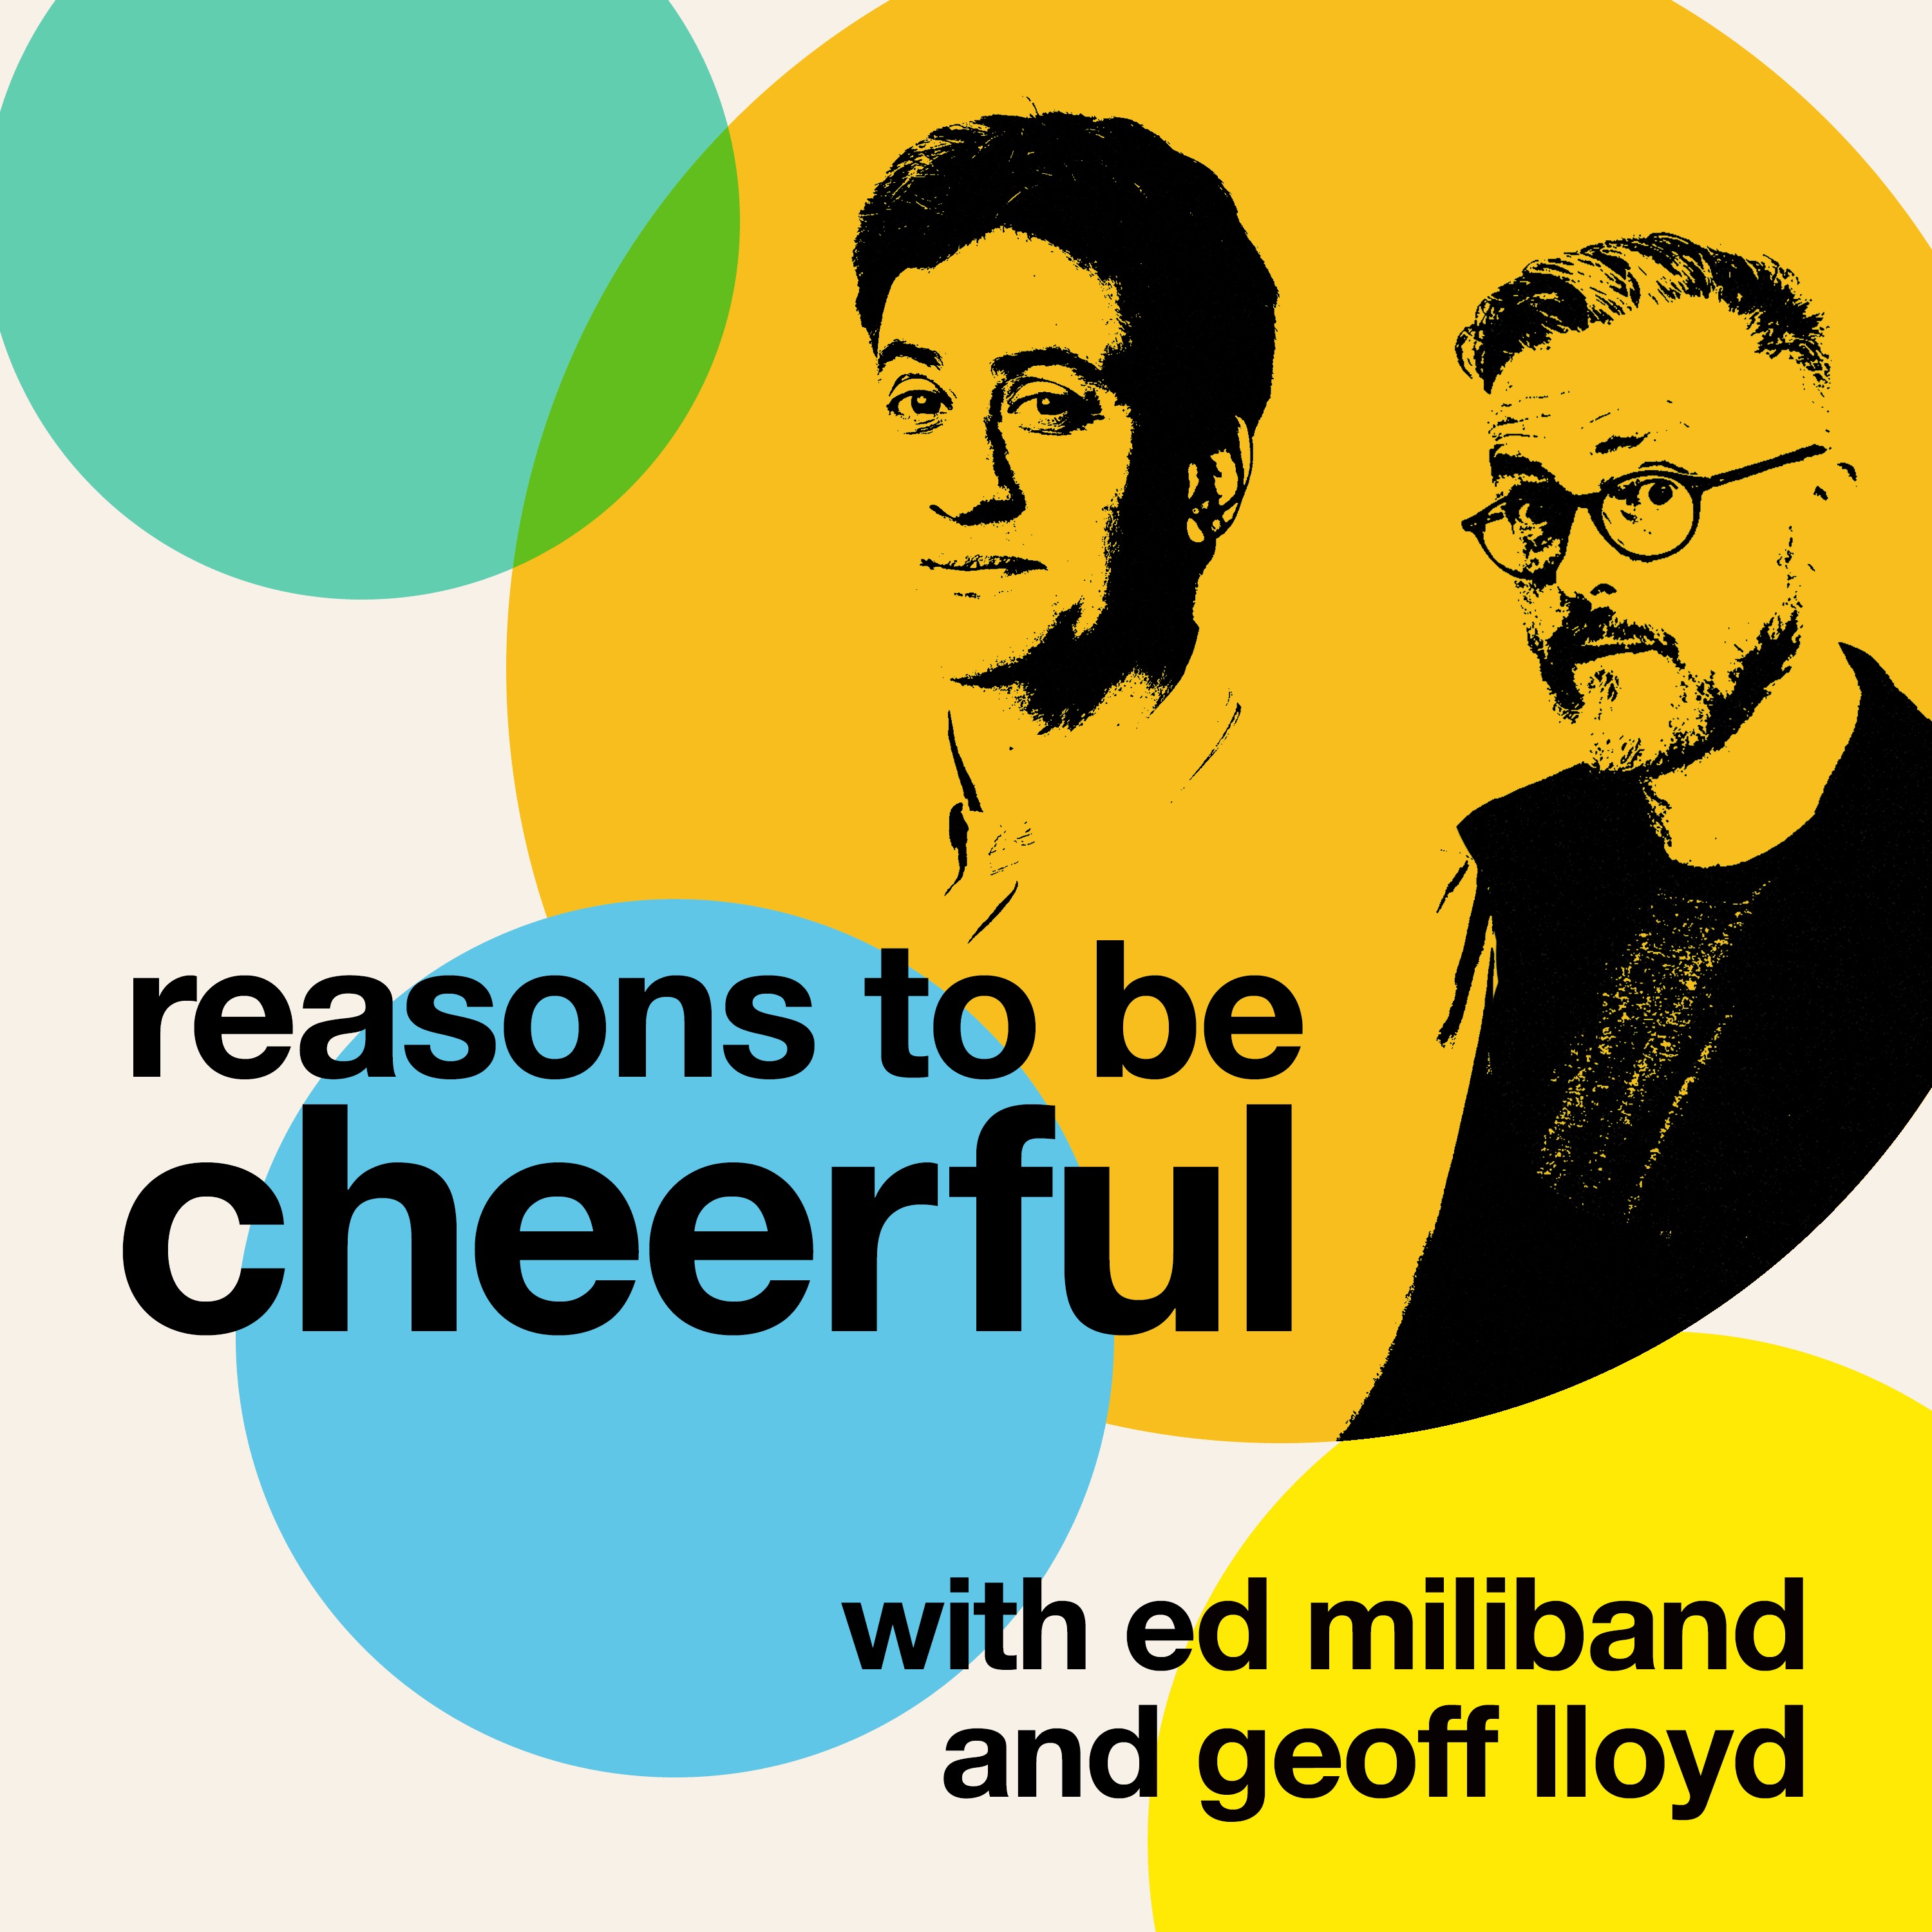 Reasons to be Cheerful with Ed Miliband & Geoff Lloyd podcast show image